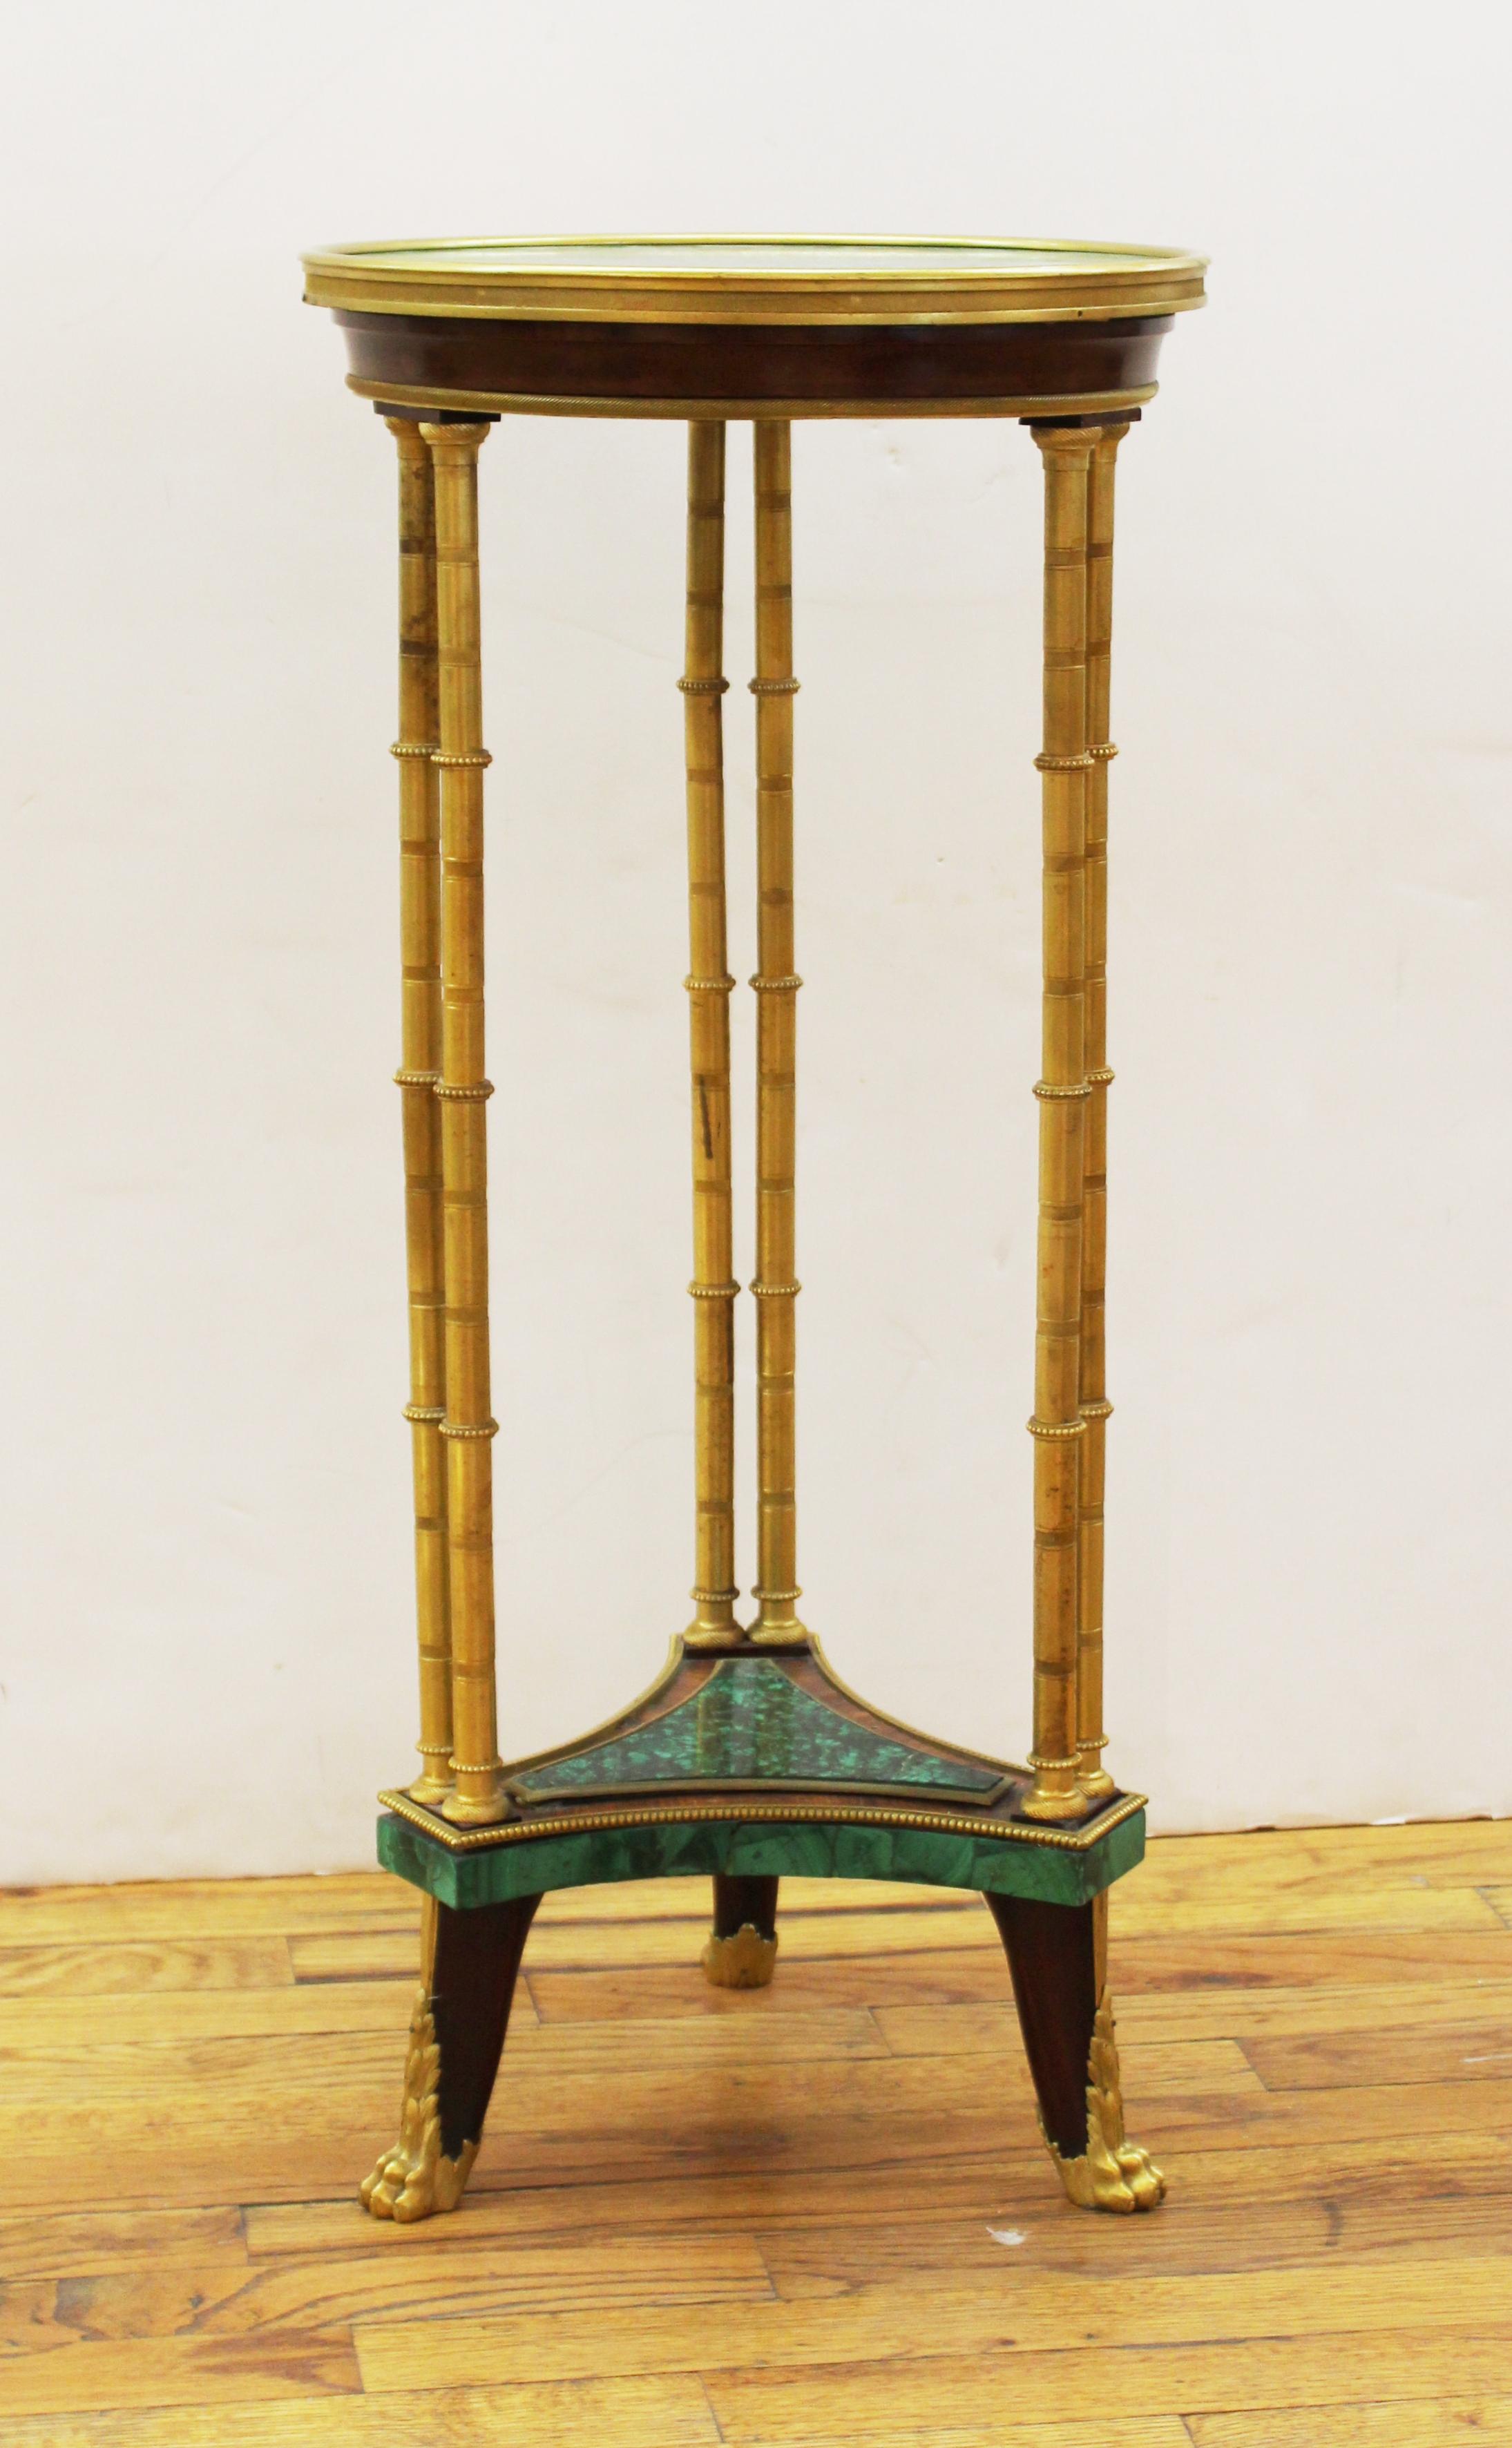 French Louis XVI style malachite gueridon table with ormolu mounts, the circular top tier supported on cluster legs of bamboo shape, the columns joined by a concave-shaped lower tier with malachite elements, in typical style of Adam Weisweiler,